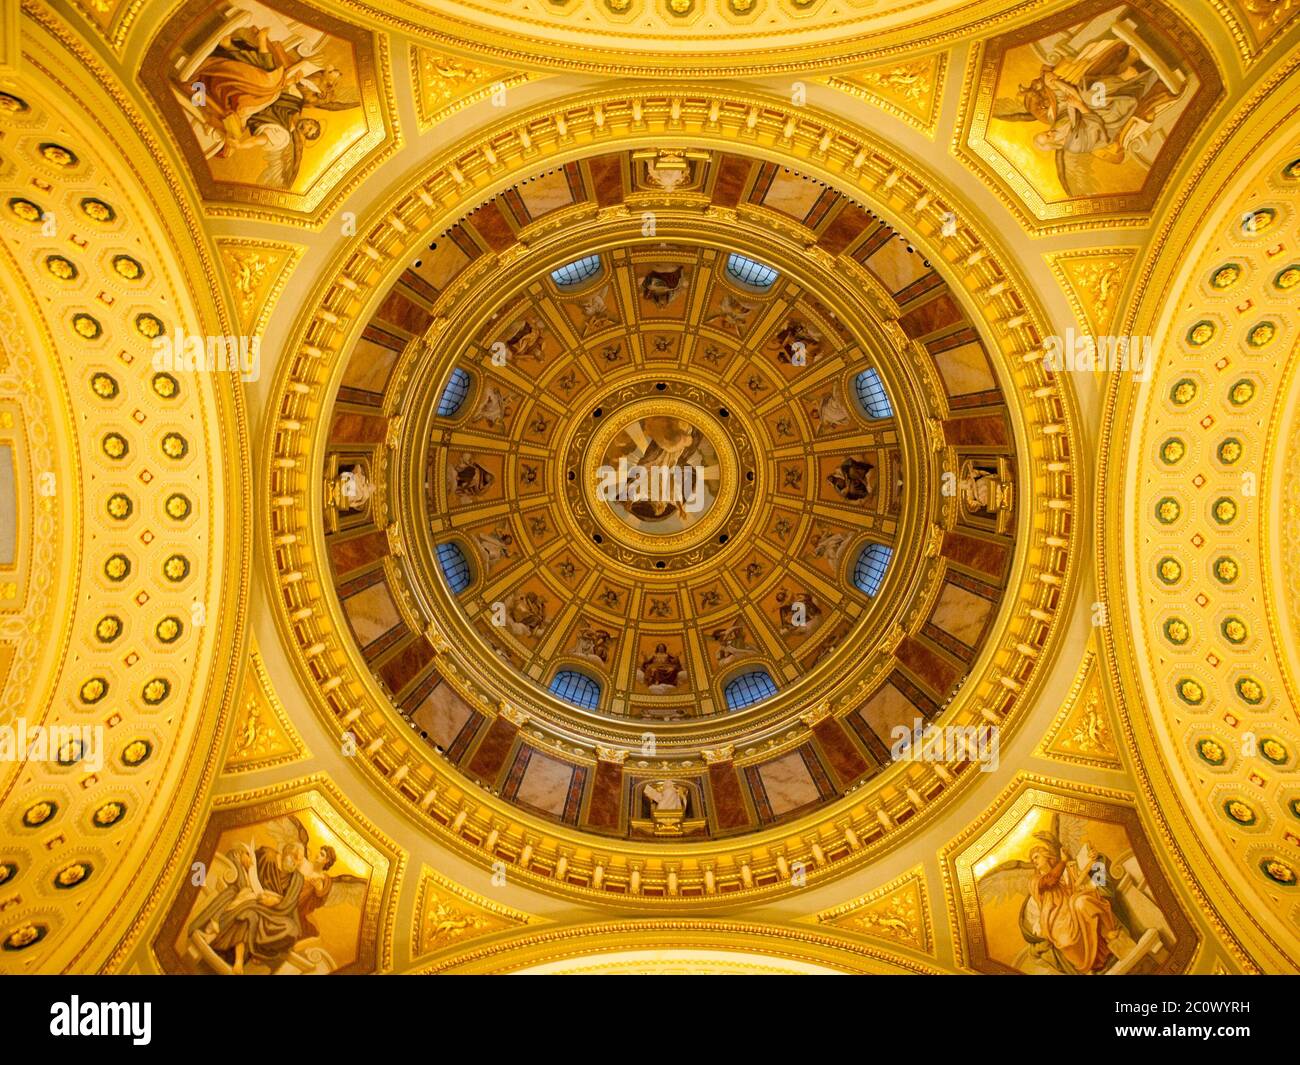 Indoor view of colorful picturesque dome ceiling in Saint Stephen's Basilica, Budapest, Hungary, Europe. UNESCO World Heritage Site. Stock Photo